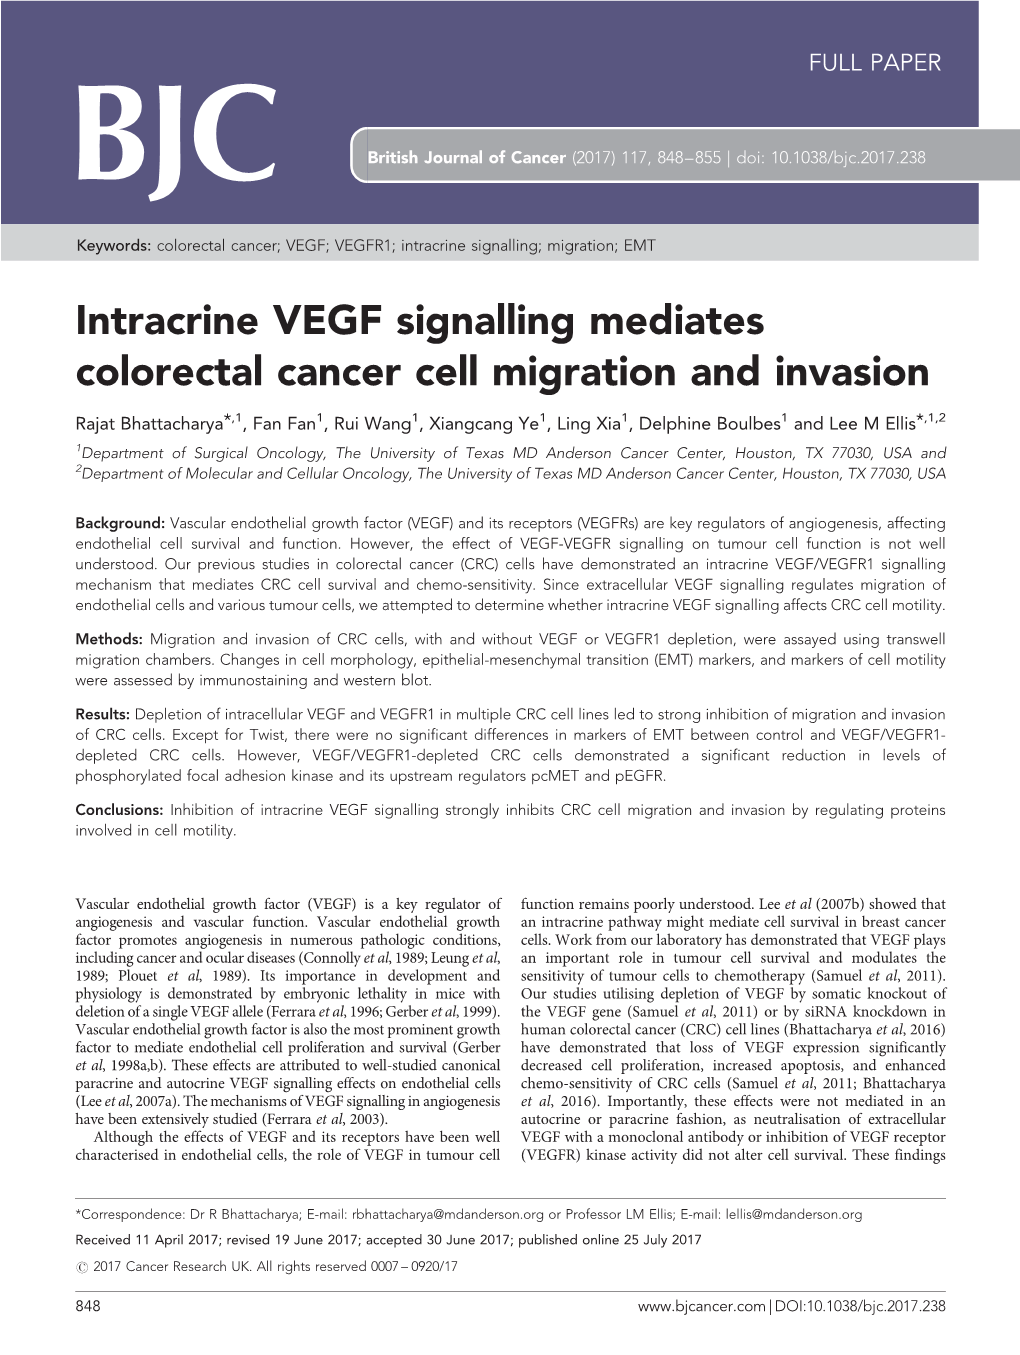 Intracrine VEGF Signalling Mediates Colorectal Cancer Cell Migration and Invasion